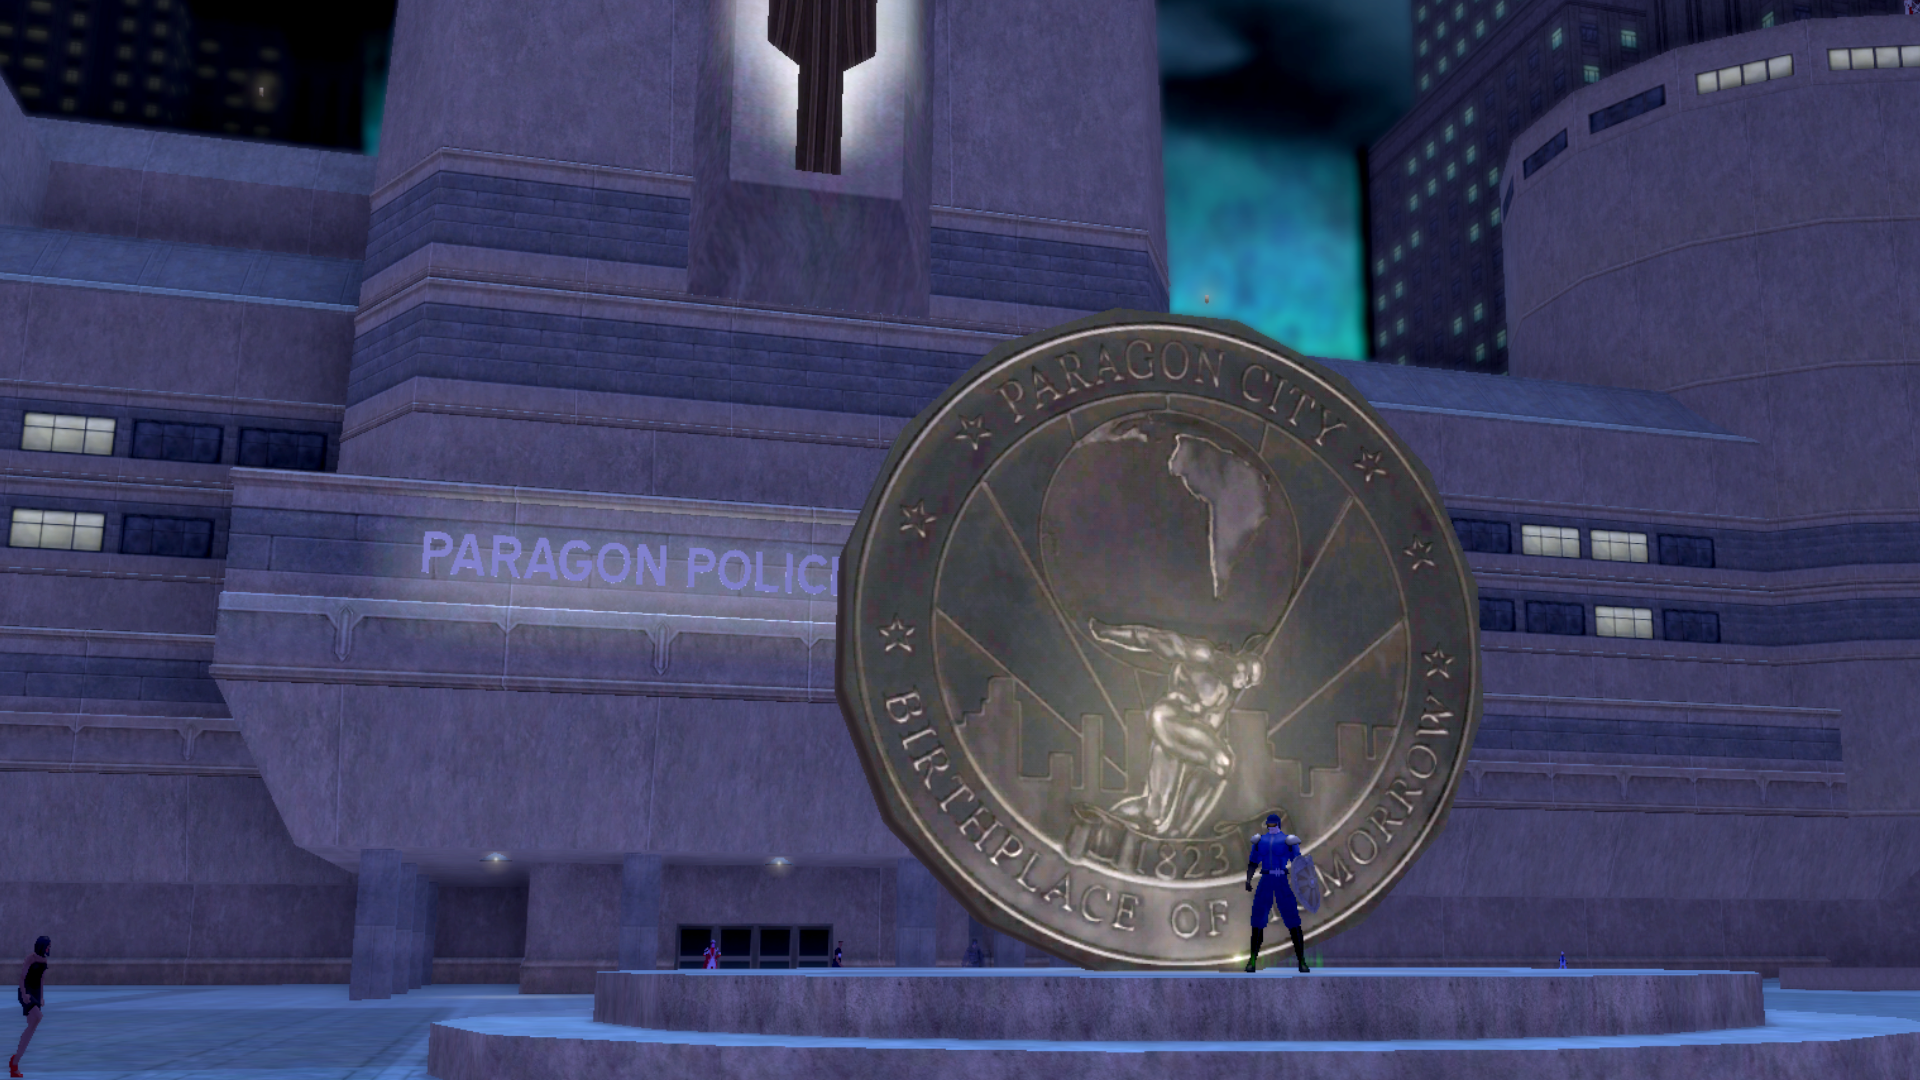 An image of the coin in City of Heroes' Kings Row, a large monument in front of a police precinct.